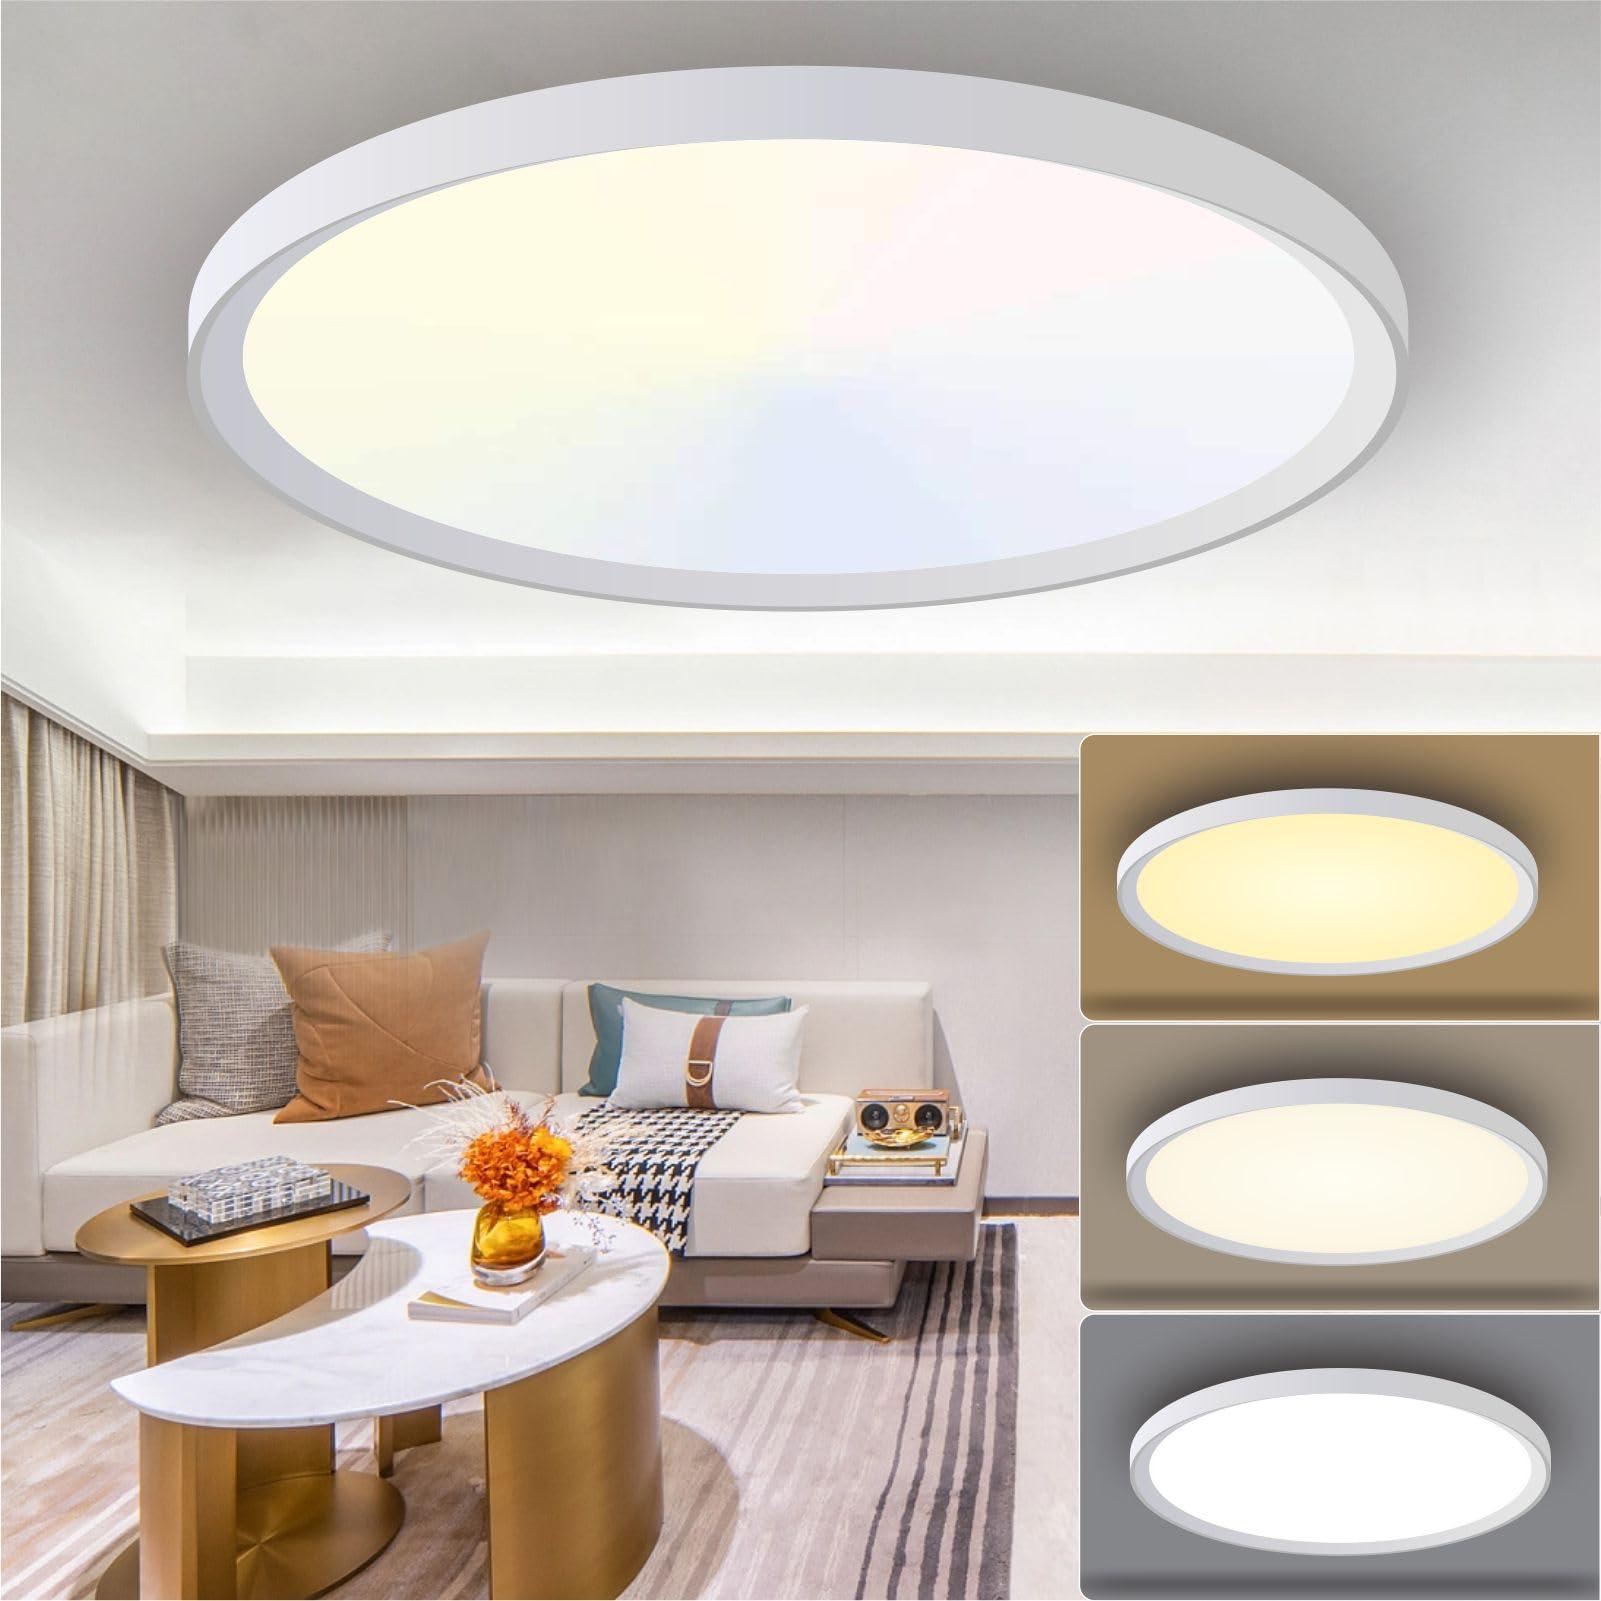 2 Pack Bathroom Light, 18W 1800LM Ceiling Lights, 3000K/4500K/6000K, 3 Color Temperature Flush Ceiling Light, Waterproof Round Ultra Thin Ceiling Light for Kitchen,Toilet,Porch,Bedroom,Utility Room